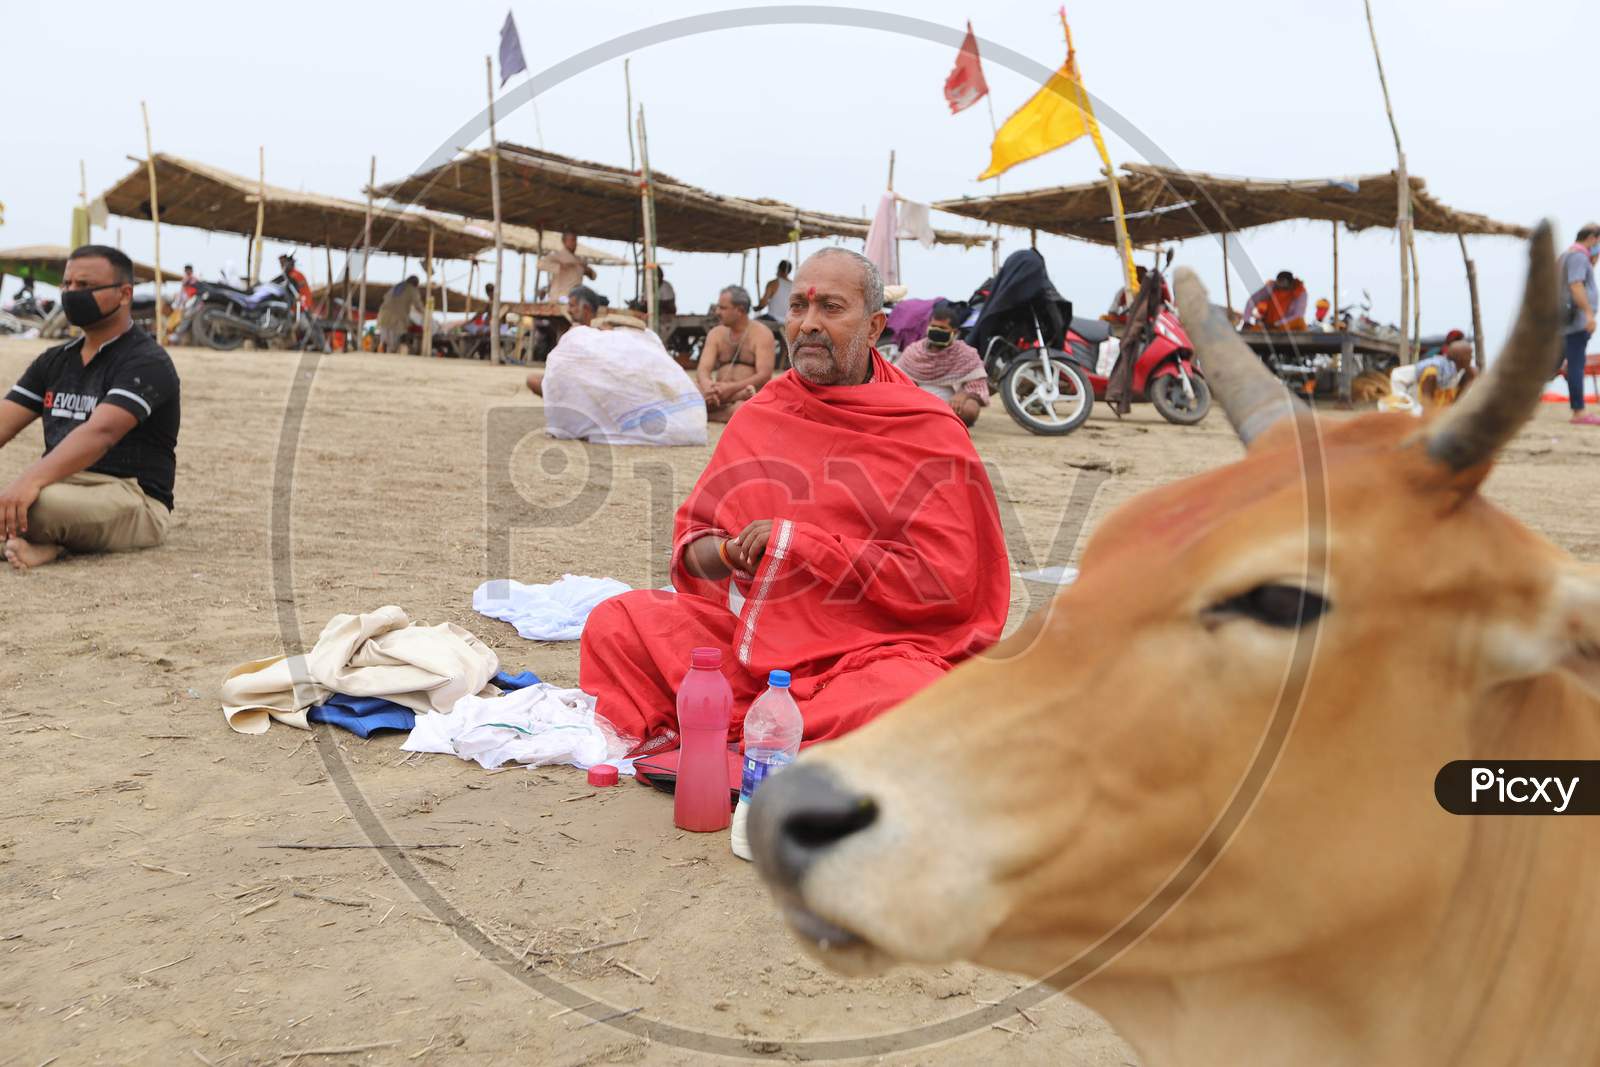 Hindu priests offers Prayers To The Sun At The Sangam, The Confluence Of The Rivers Ganges, Yamuna And Saraswati, During An Annular Solar Eclipse In Prayagraj, June 21,2020